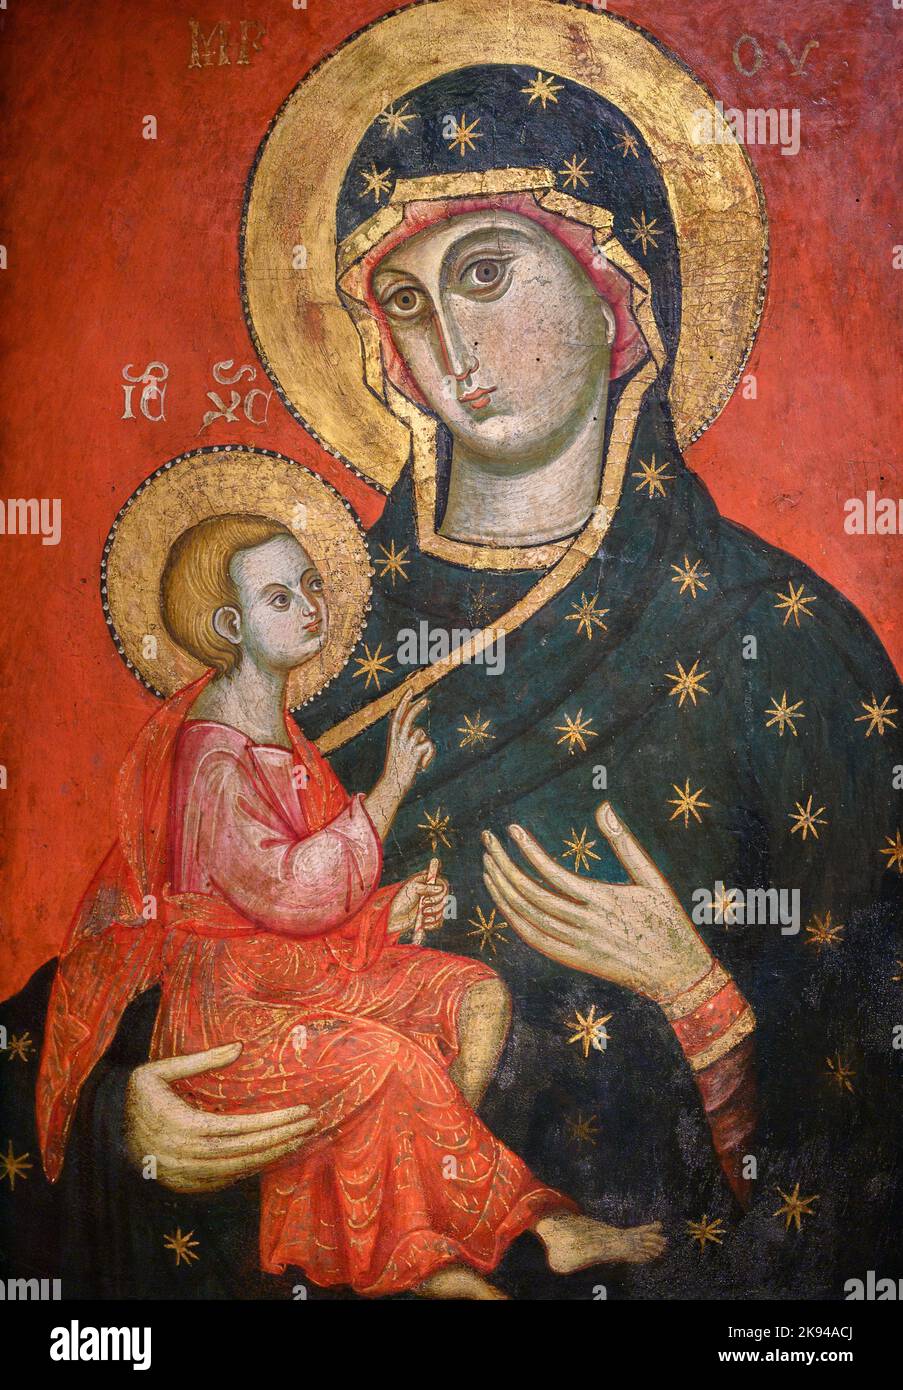 Virgin and Child by a Venetian-Byzantine painter. End of 13th century or beginning of 14th century. Tempera on wood. Stock Photo